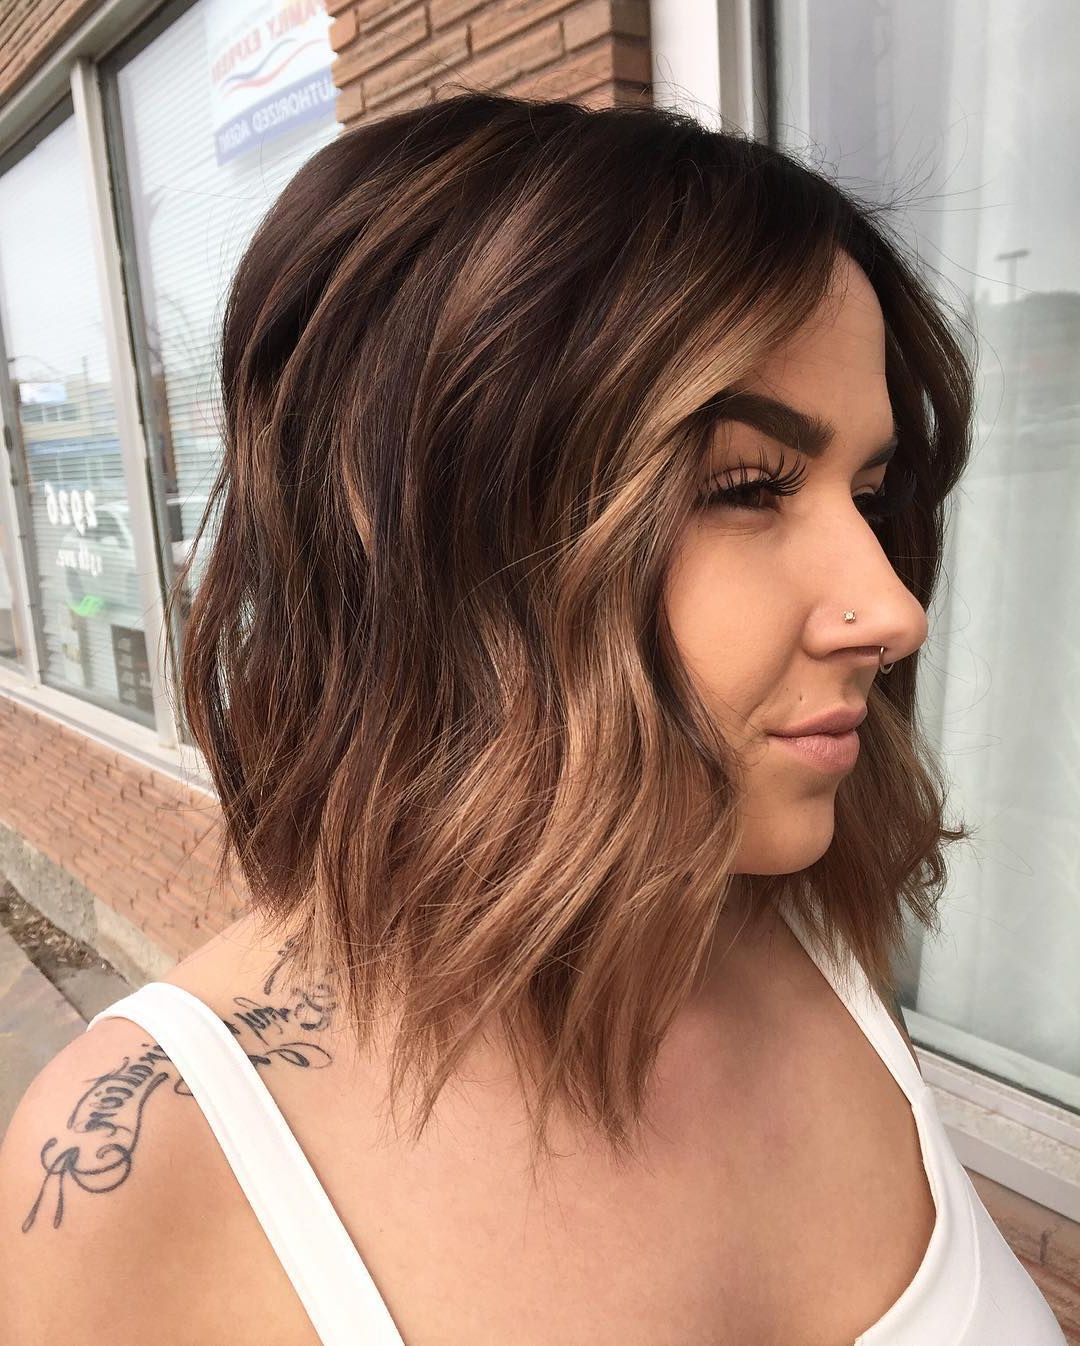 30 Edgy Medium Length Haircuts For Thick Hair [october, 2018] With Bob Hairstyles For Thick Hair (View 19 of 20)